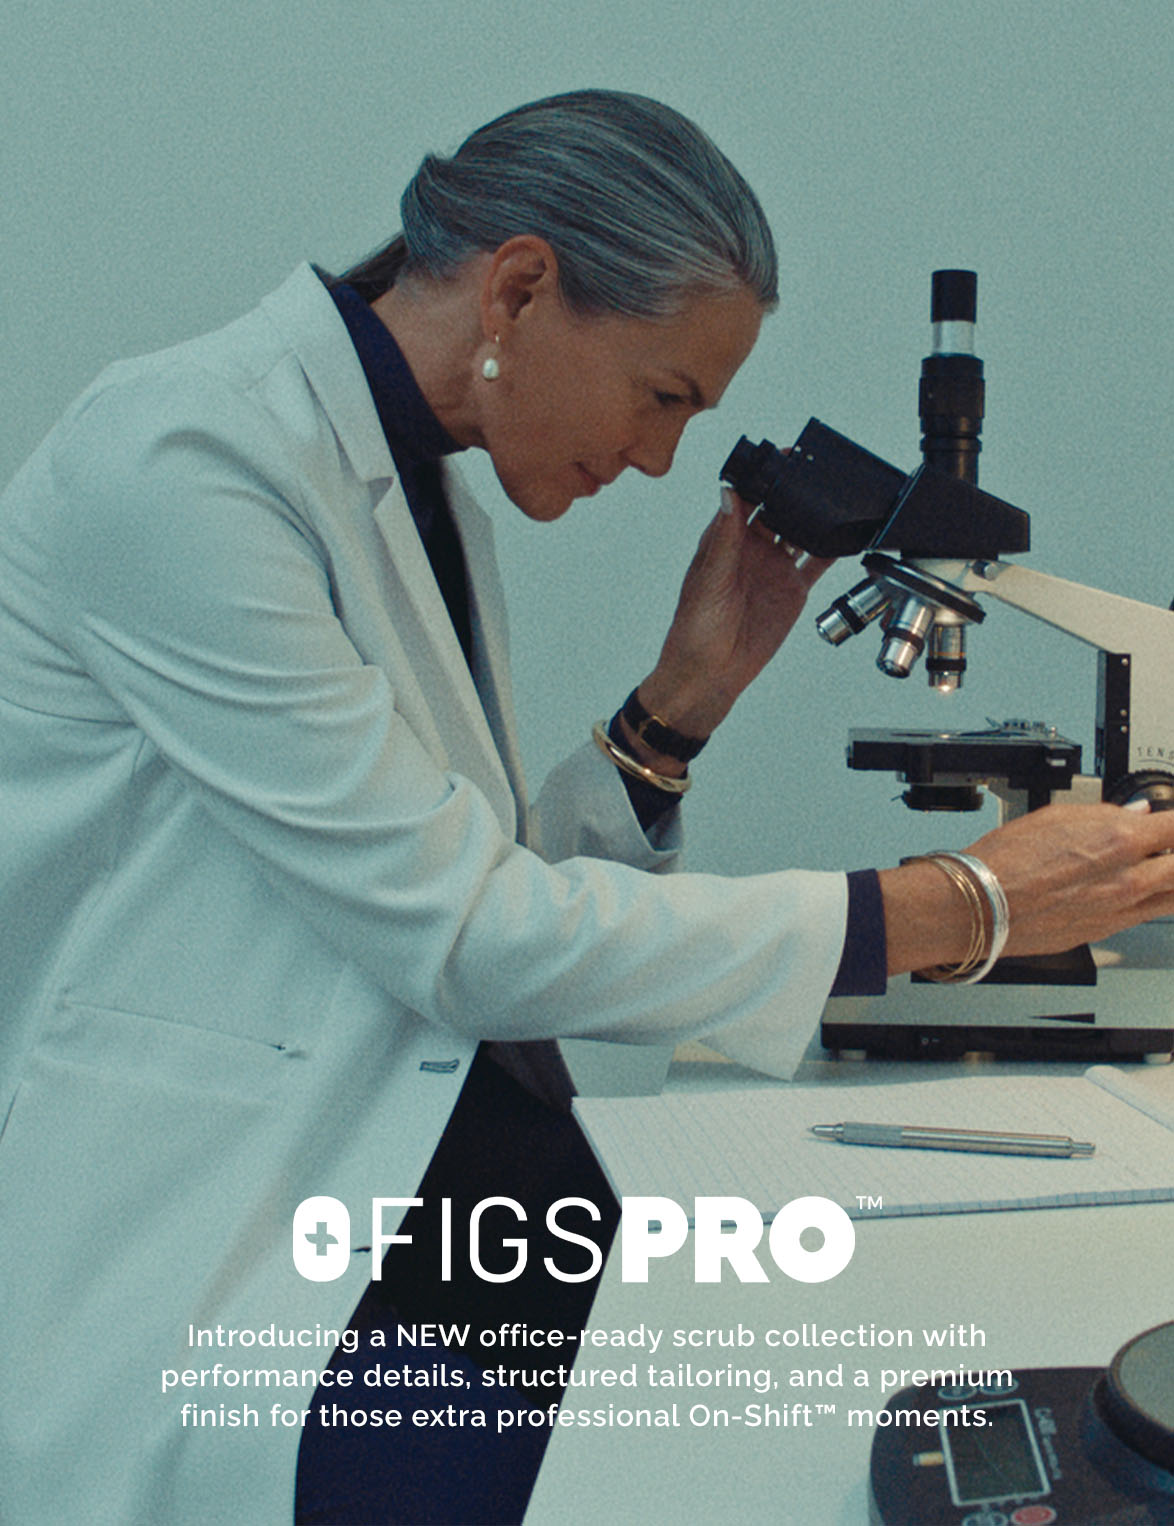 Meet FIGS PRO™ – Putting the PRO in Professional